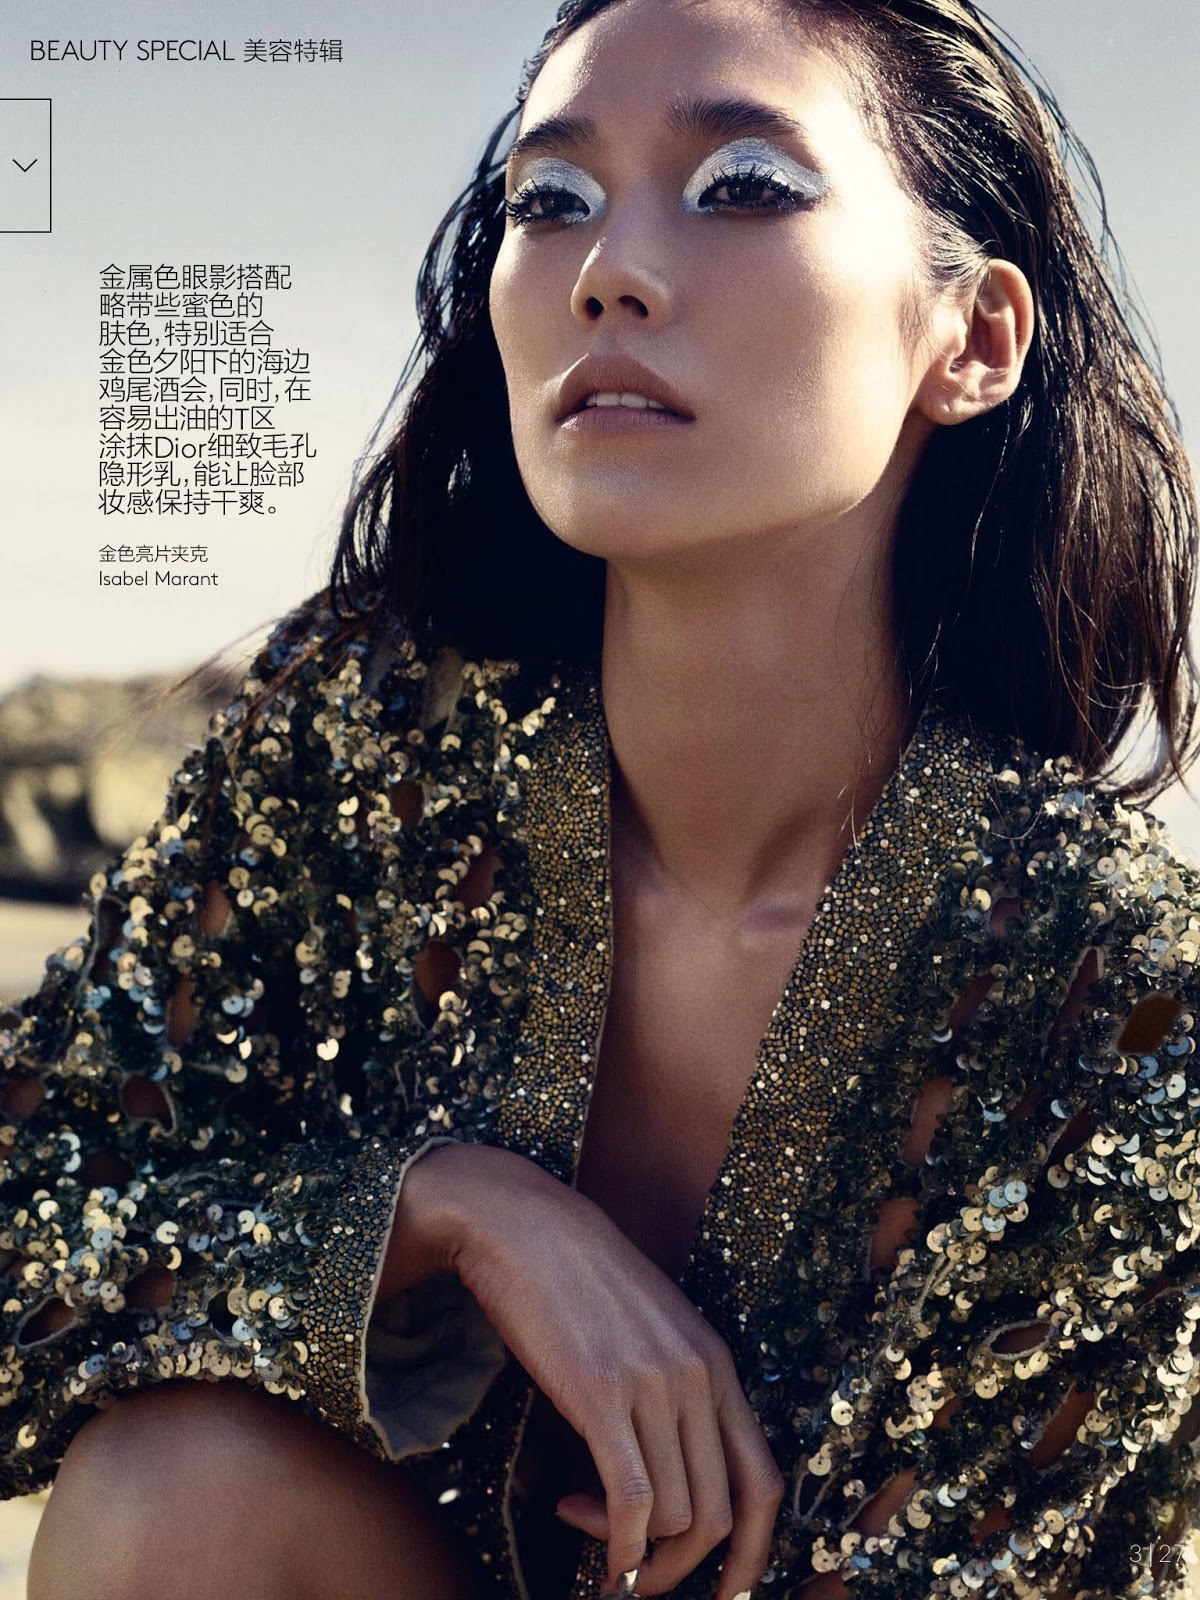 leahcultice:</p>
<p>Tao Okamoto by David Slijper for Vogue China July 2014